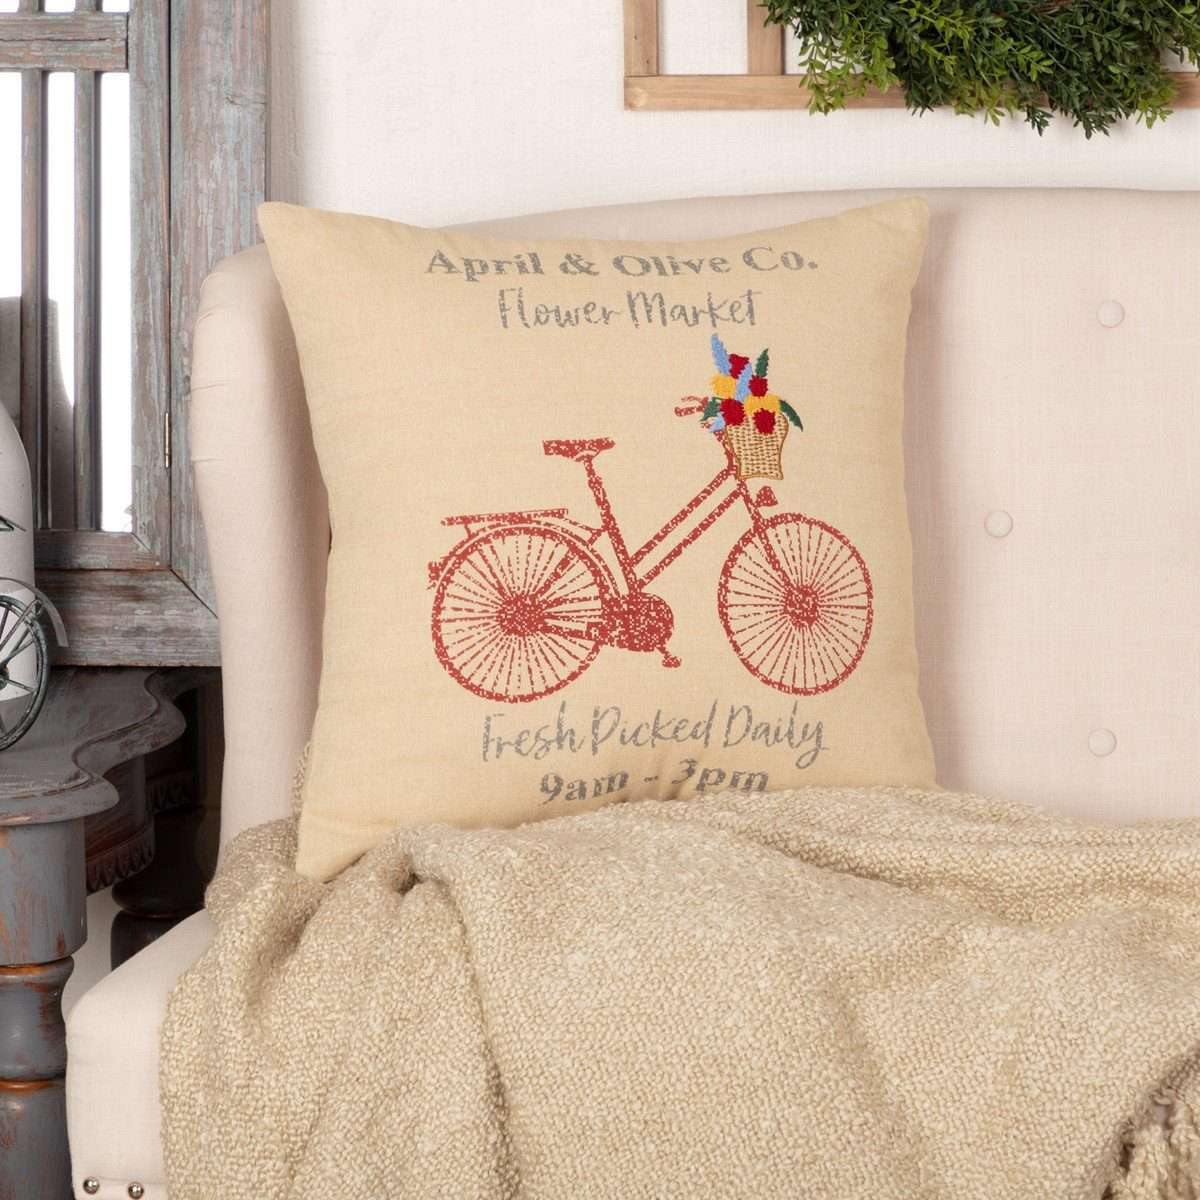 Farmer's Market Flower Market Pillow 18x18 barn red bicycle VHC Brands